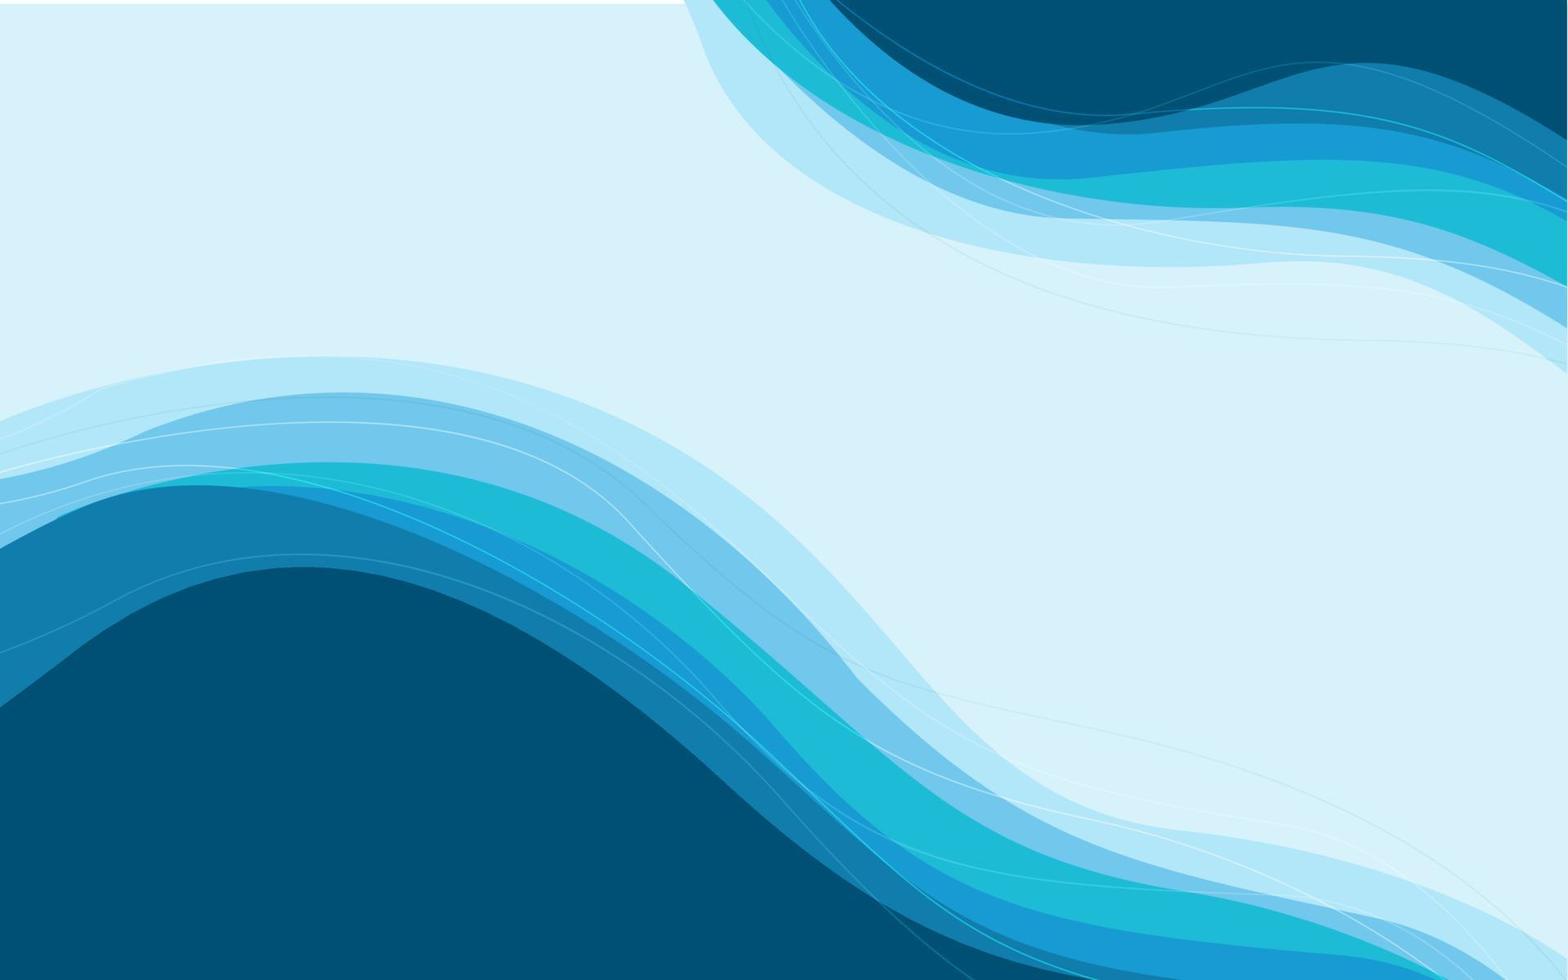 Blue Abstract Wave Background. Blue wave template vector